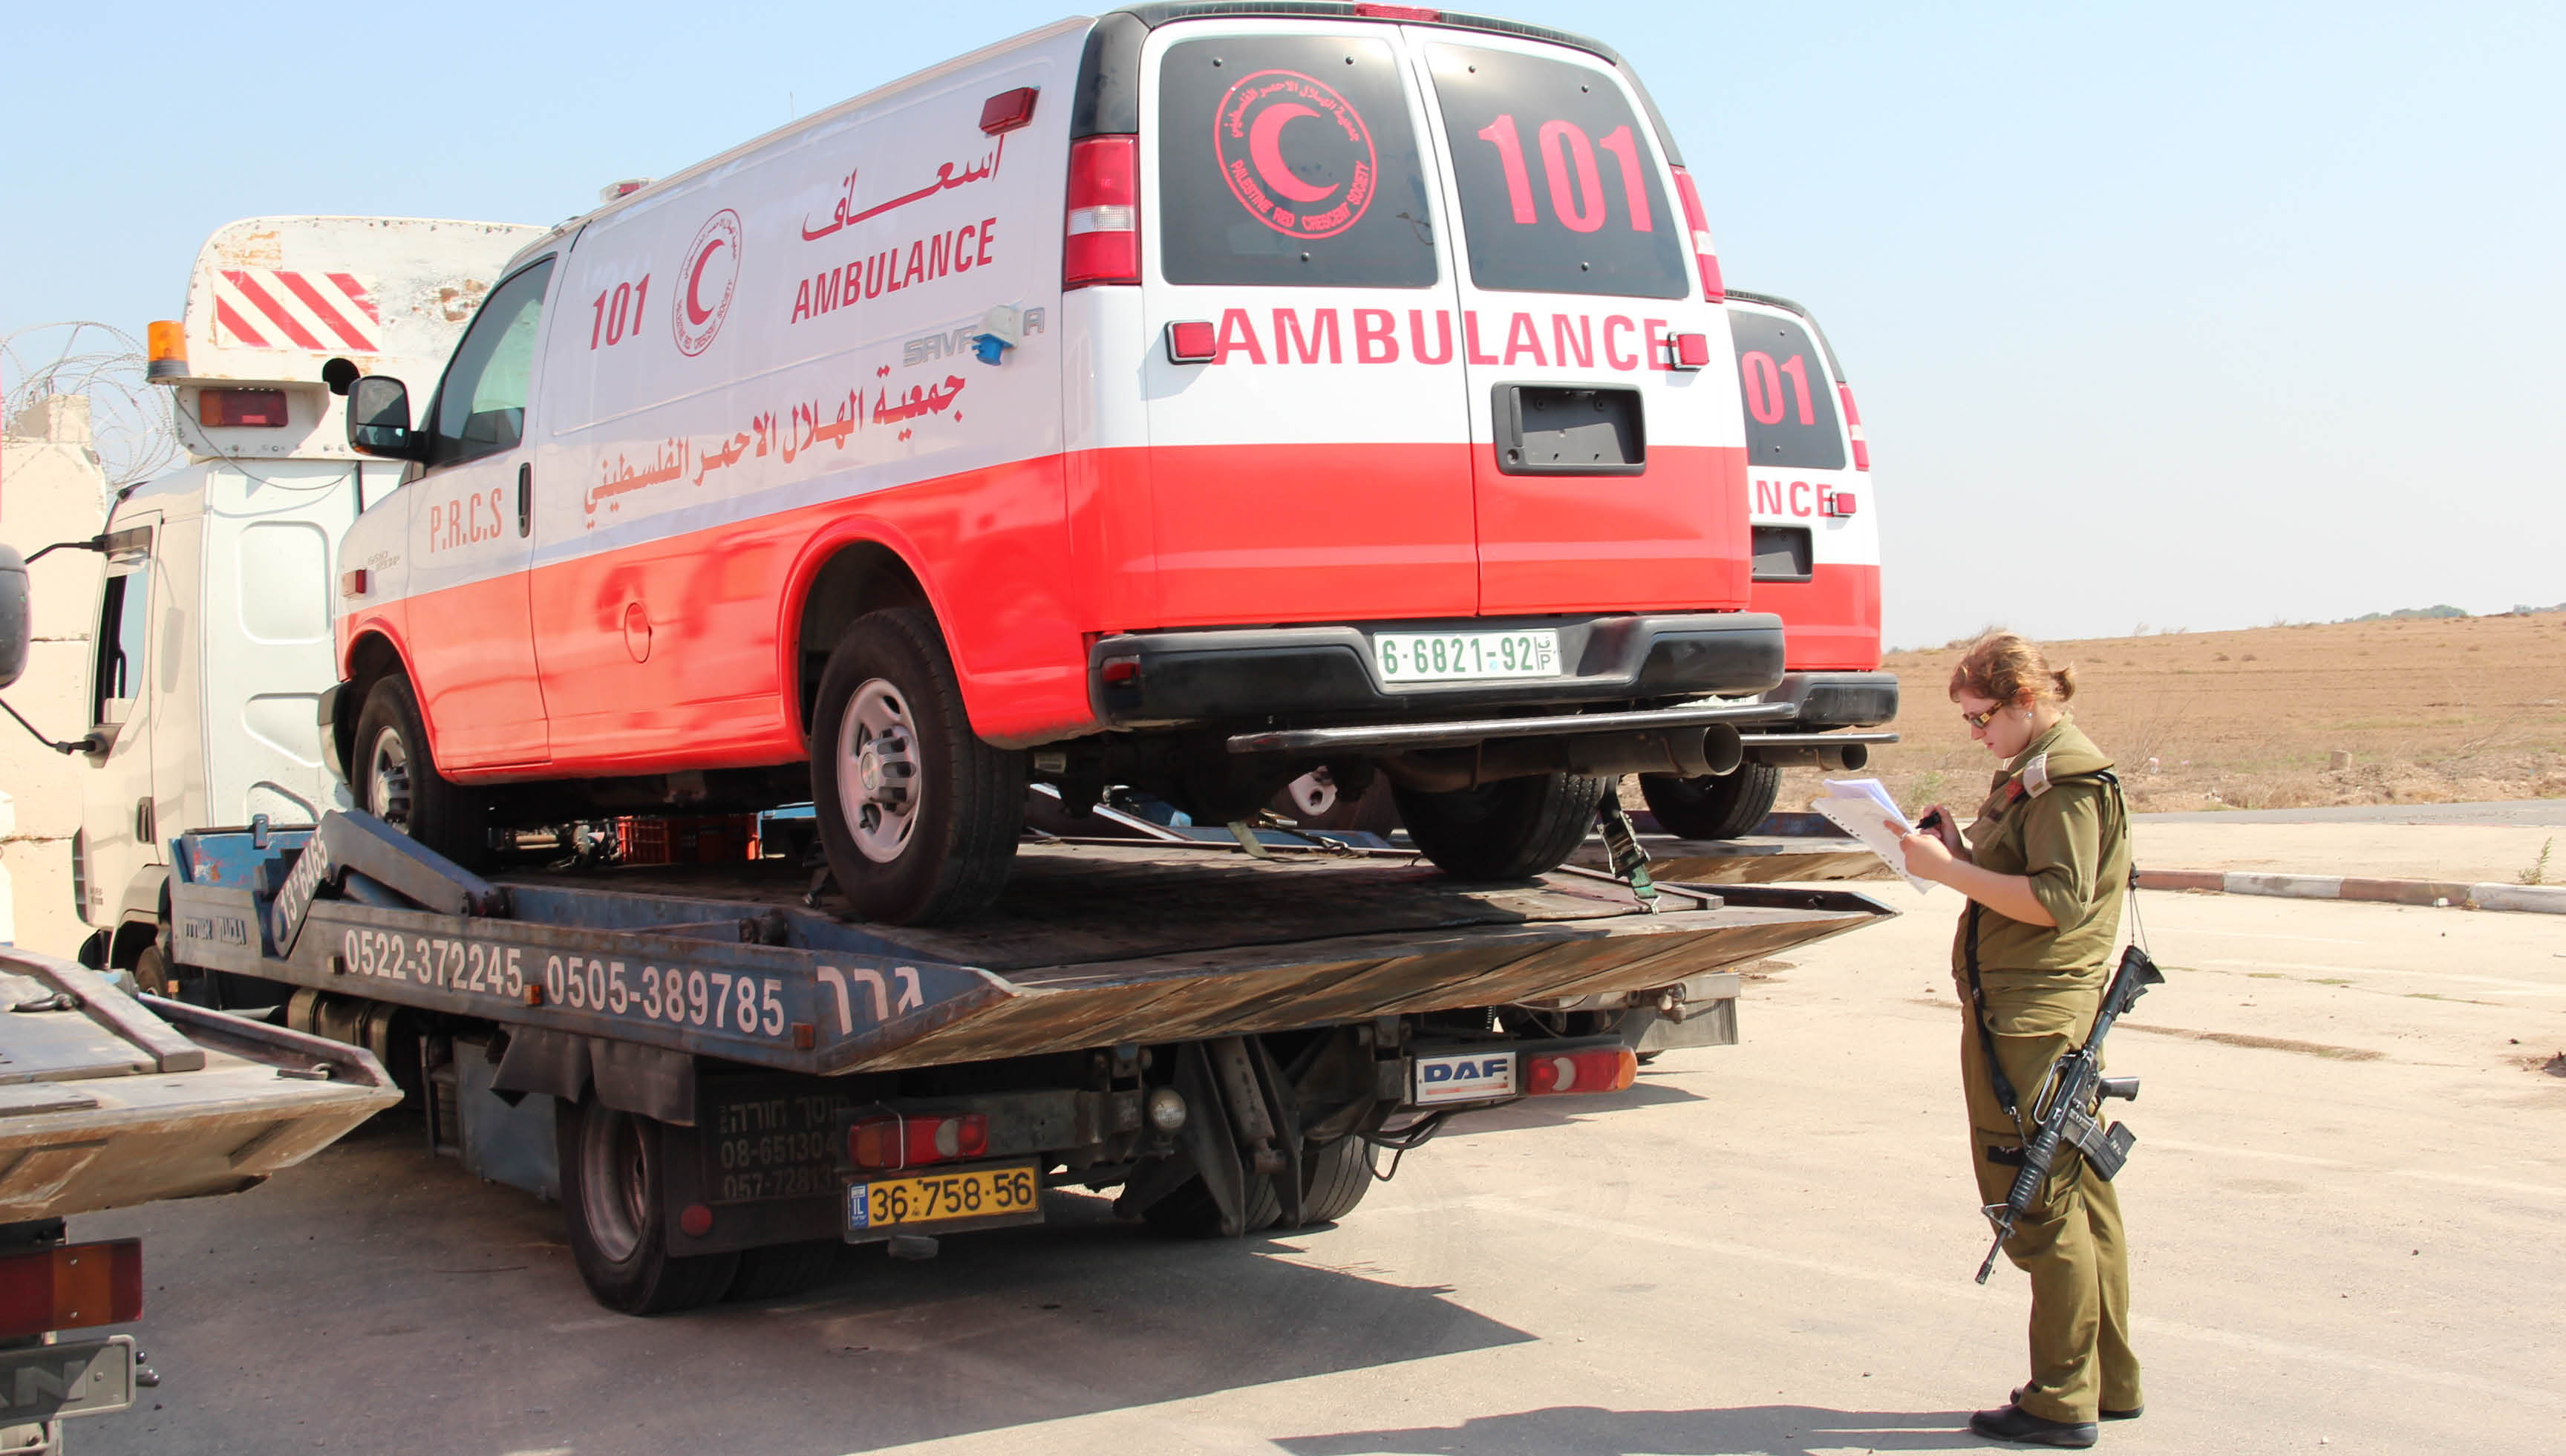  Israel and the Gaza Strip: Why Economic Sanctions Are Not Collective Punishment Ambulance-001 (1).jpg